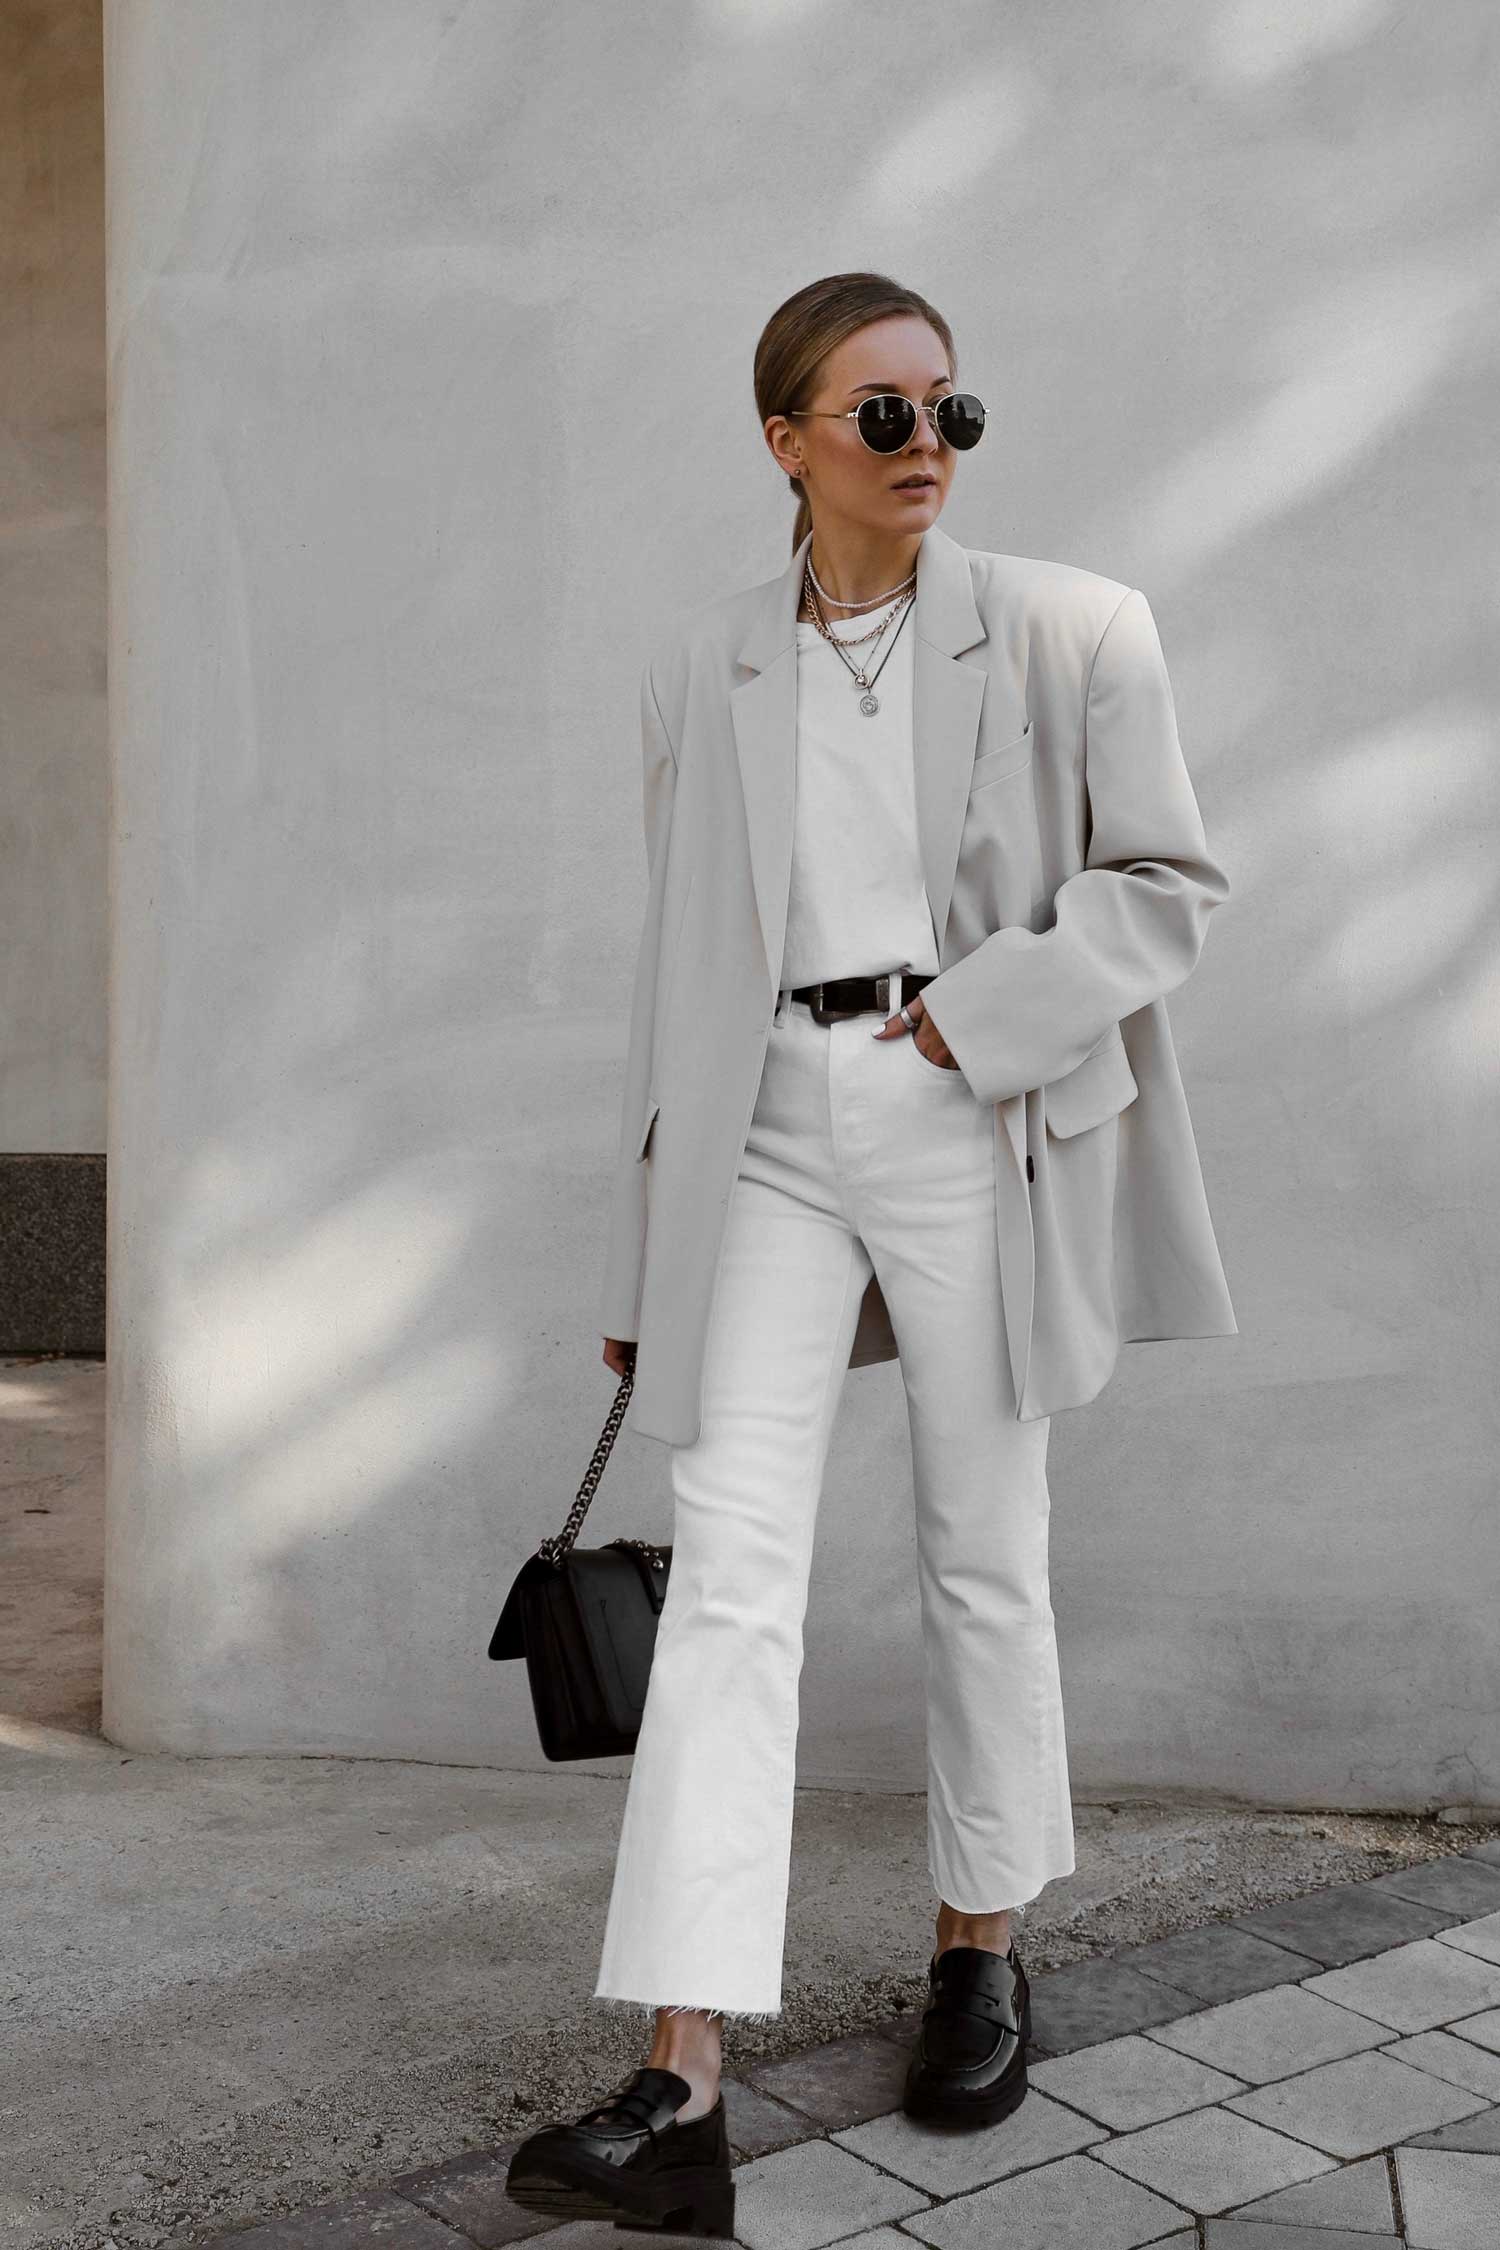 How to Wear White Jeans or Slacks after Labor Day - Fashion Cleaners